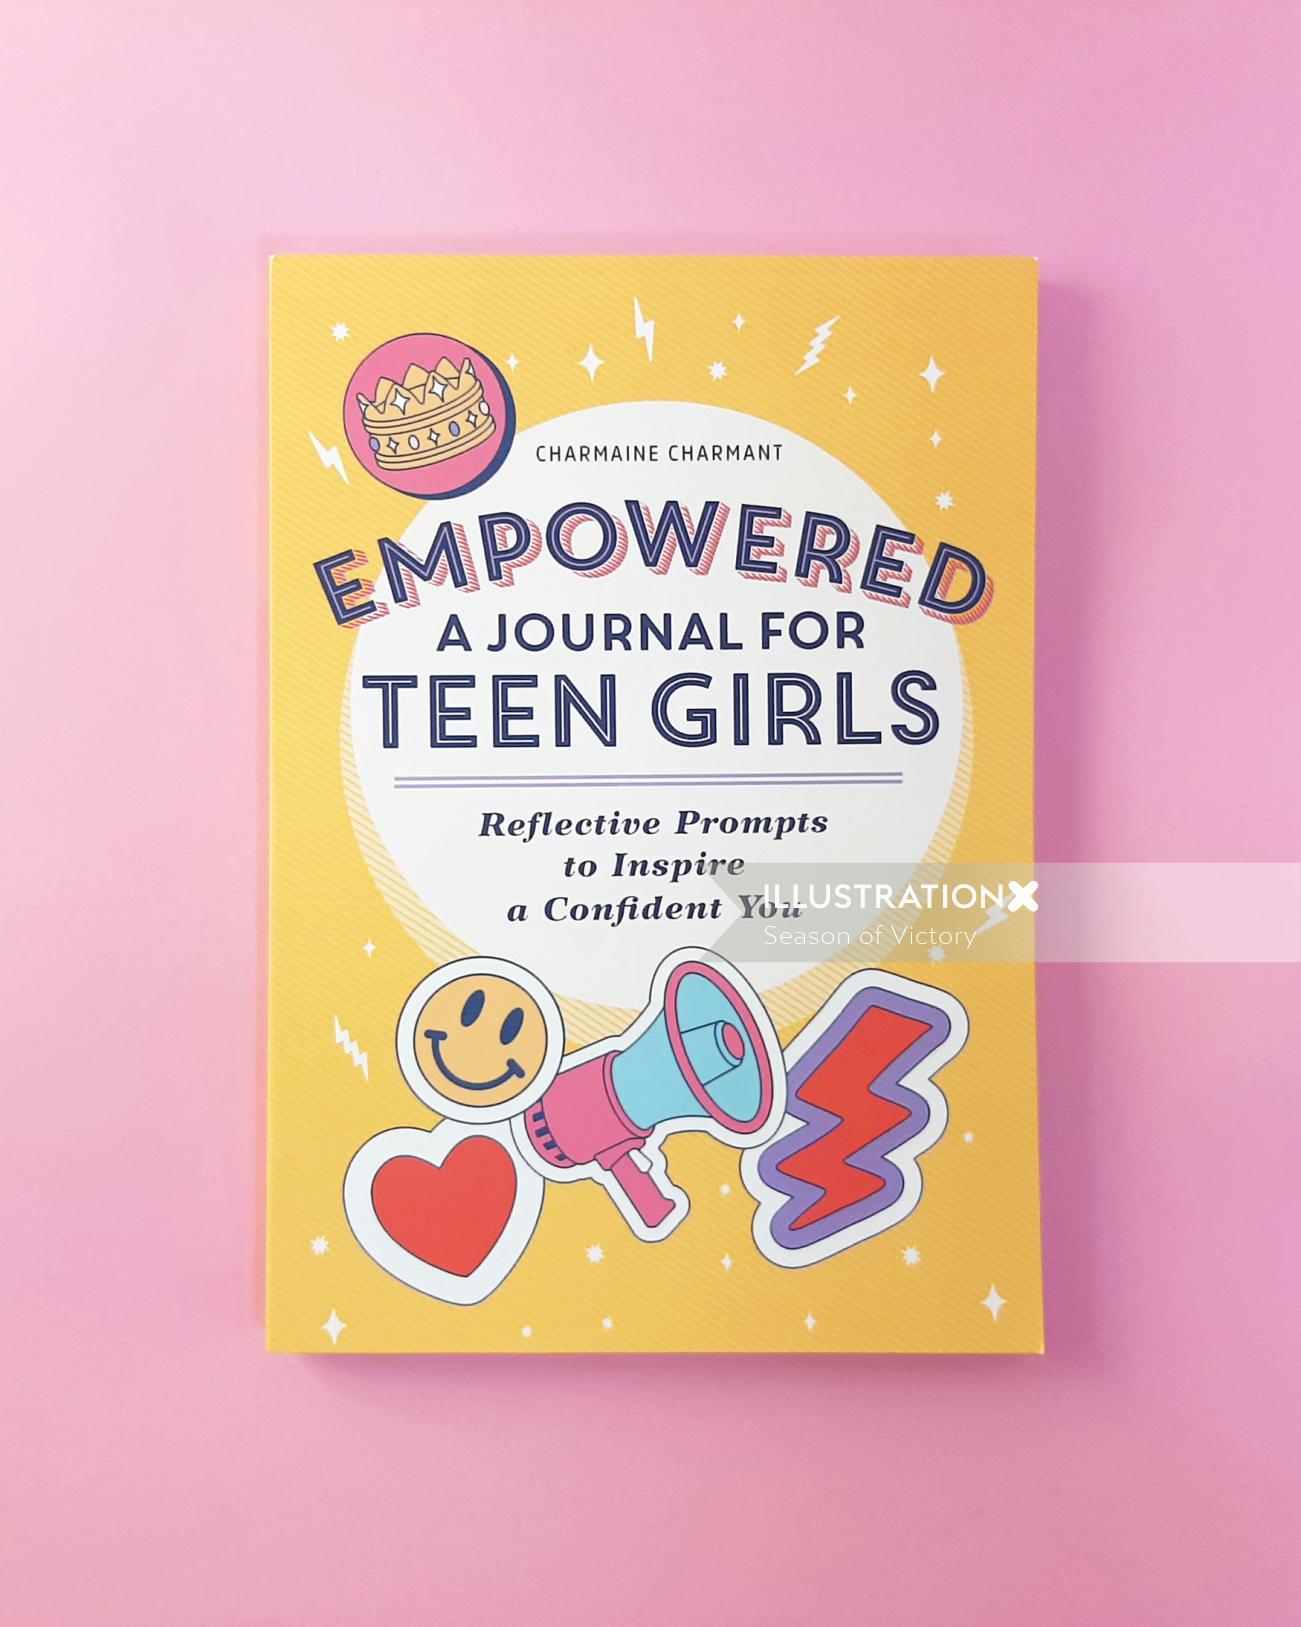 empowerment, teen, girl power, empowered, confidence, book illustrations, book cover, cover art, ico